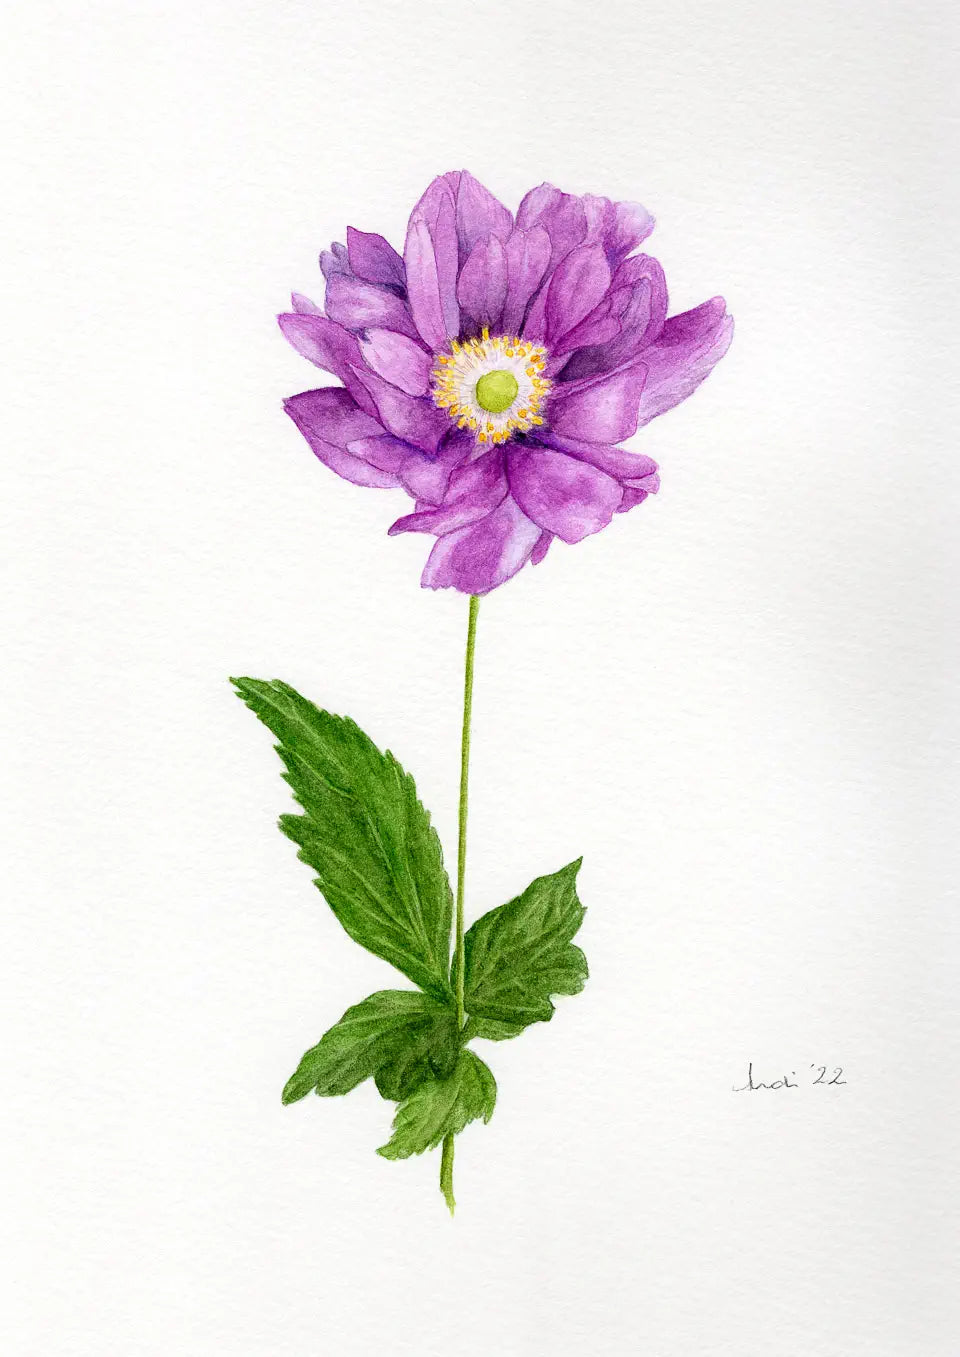 Watercolour painting of a pink flower